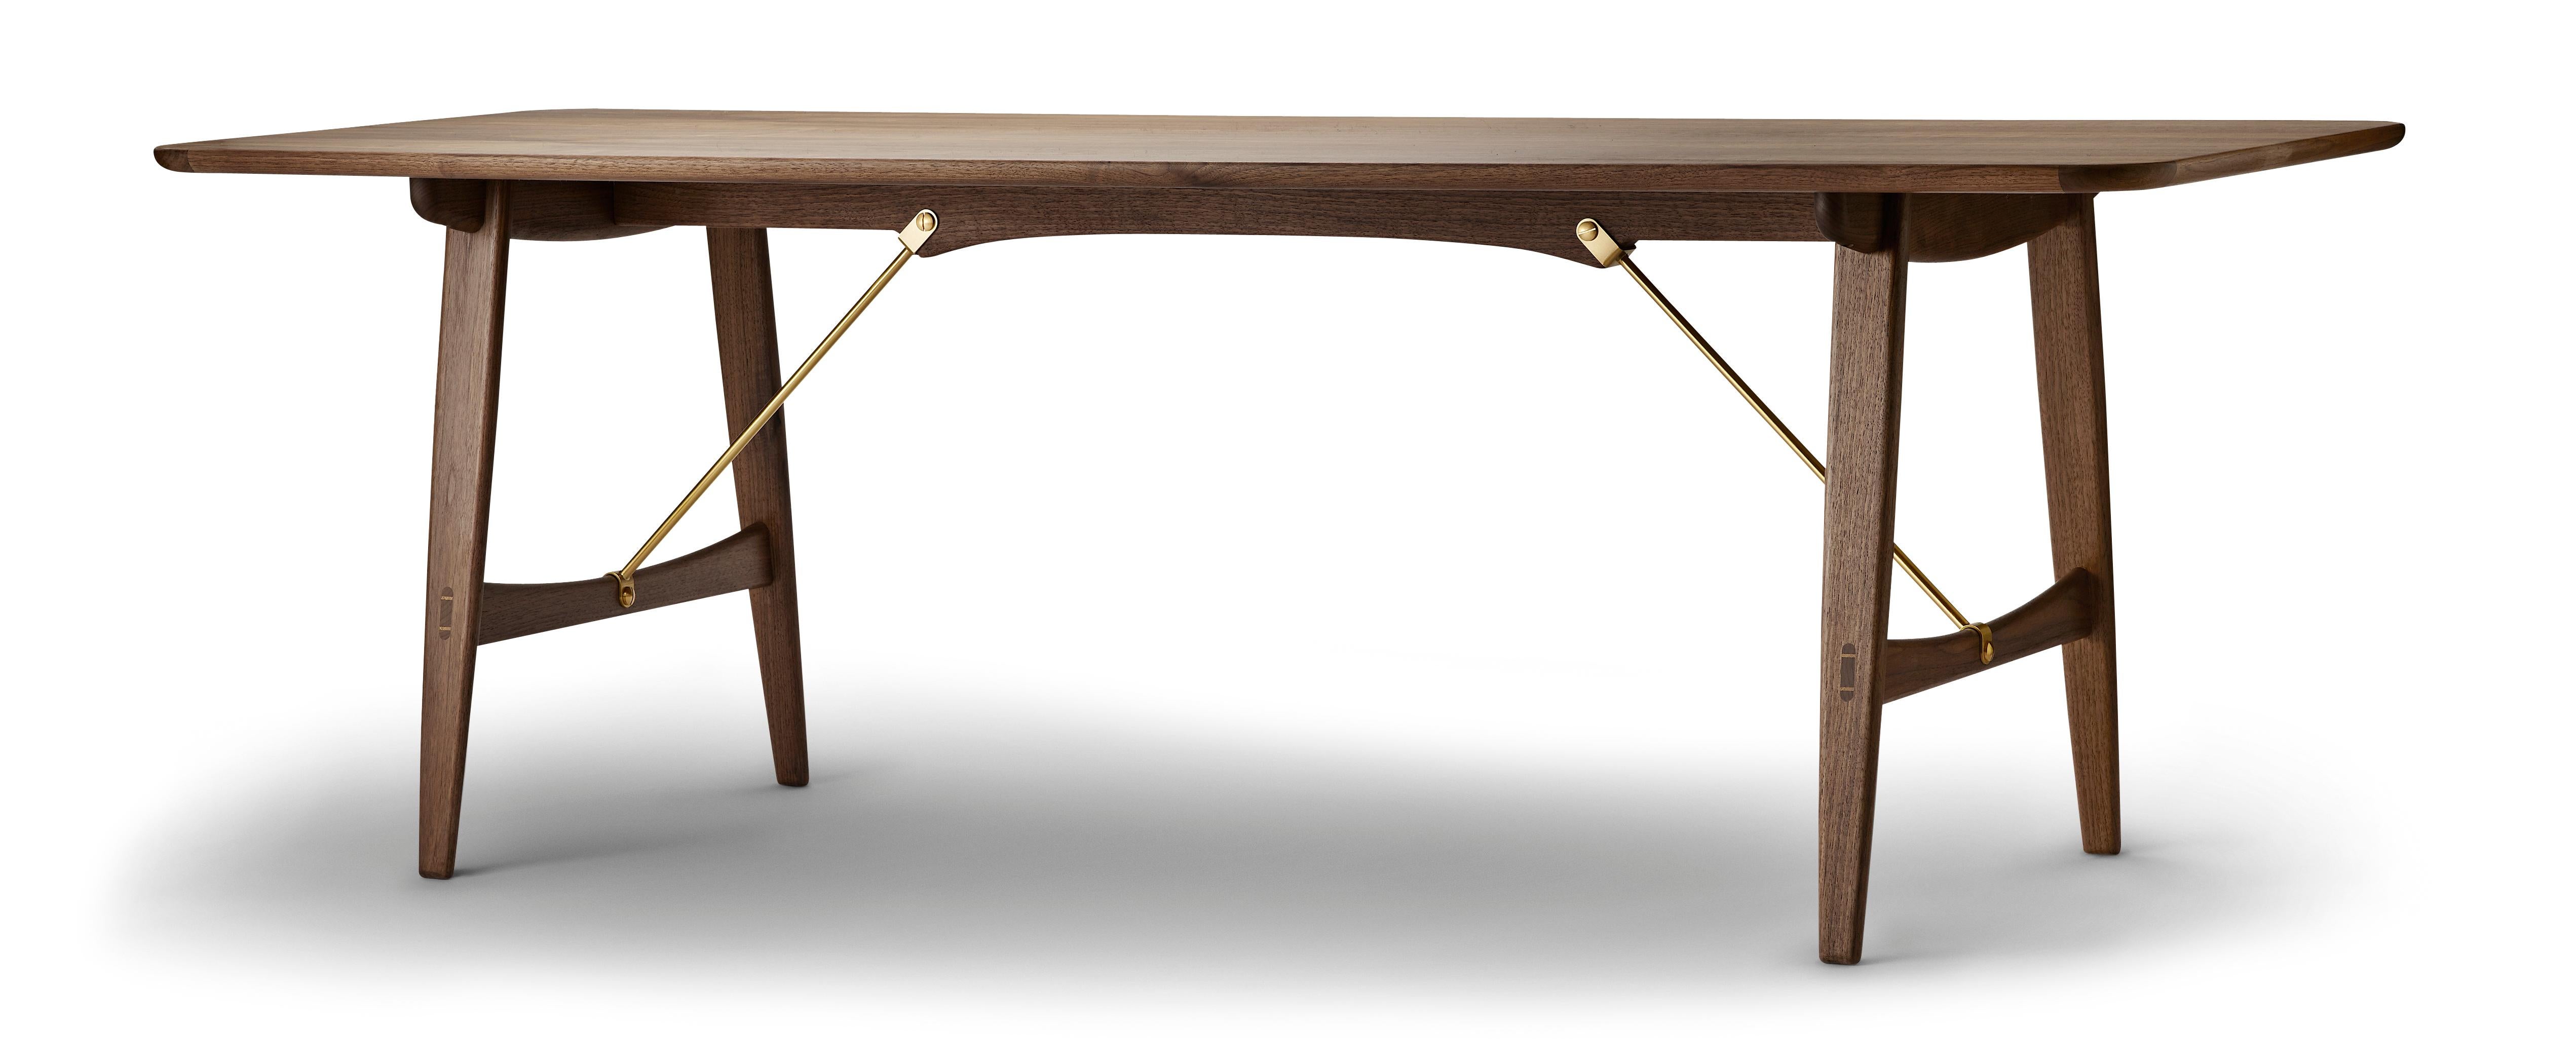 Brown (Walnut Oil) BM1160 Hunting Table in Wood with Brass Cross Bars by Børge Mogensen